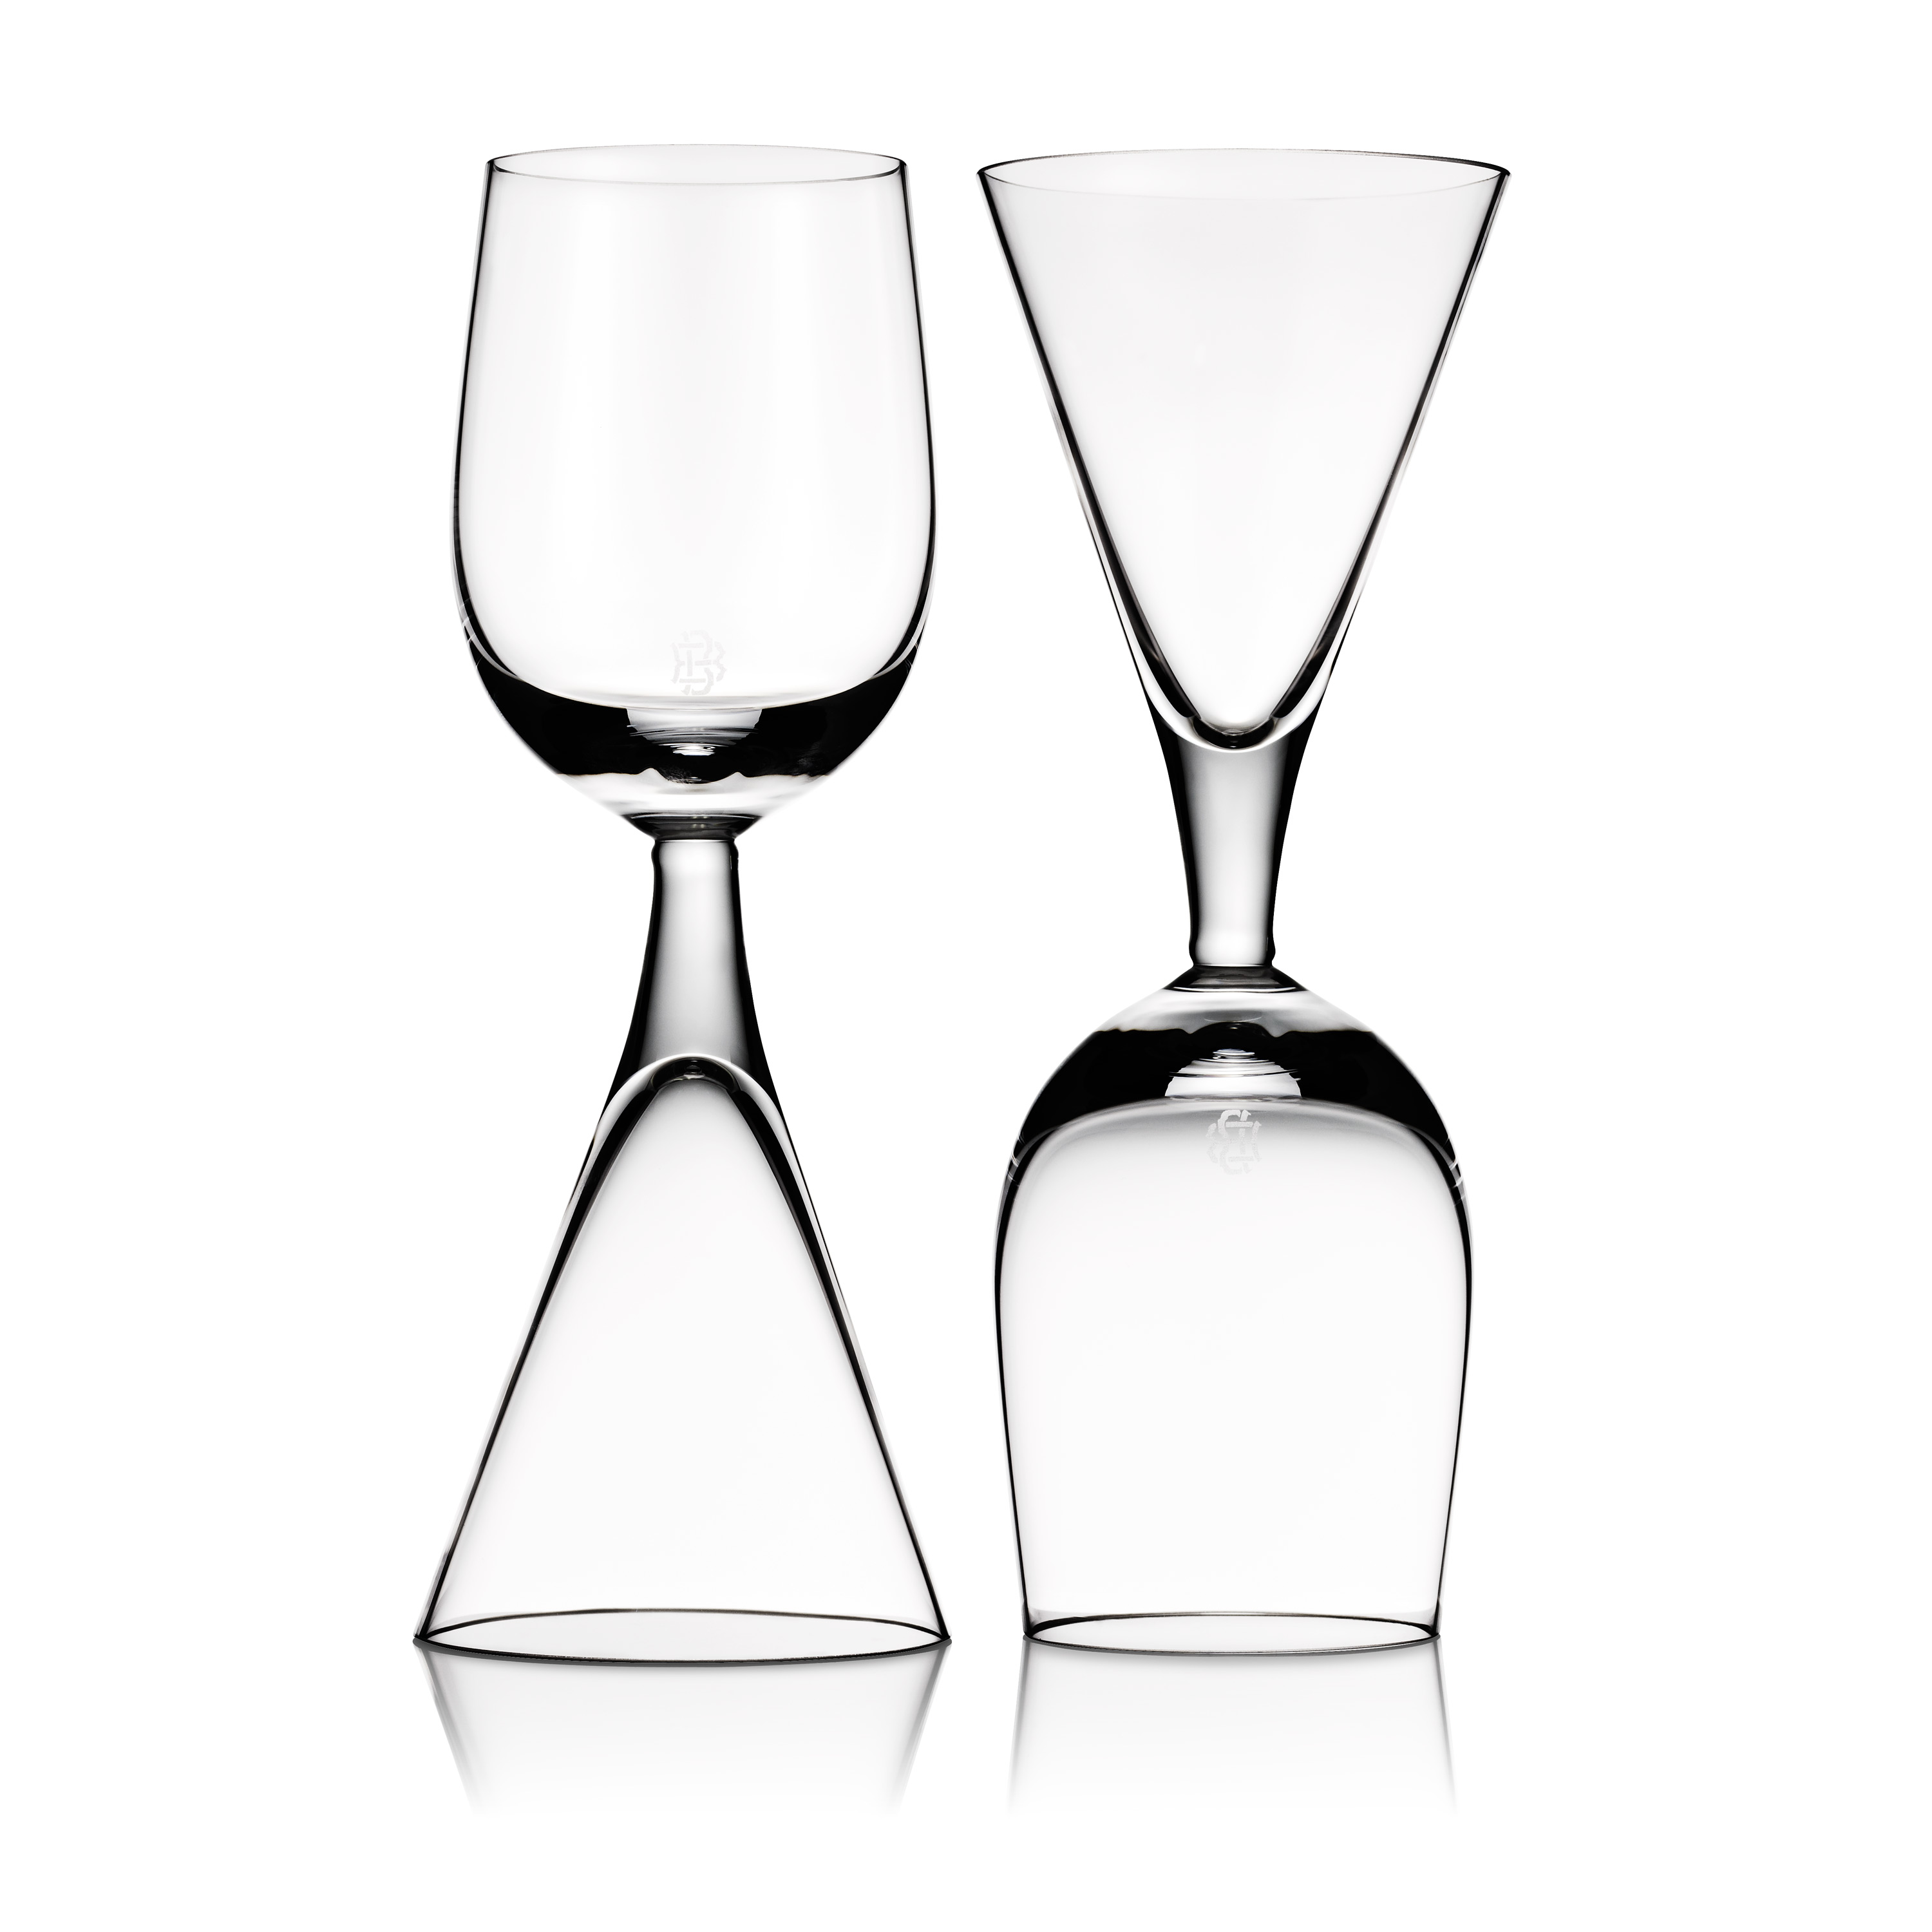 Oenophilia Wino Sippers (Set of 2)